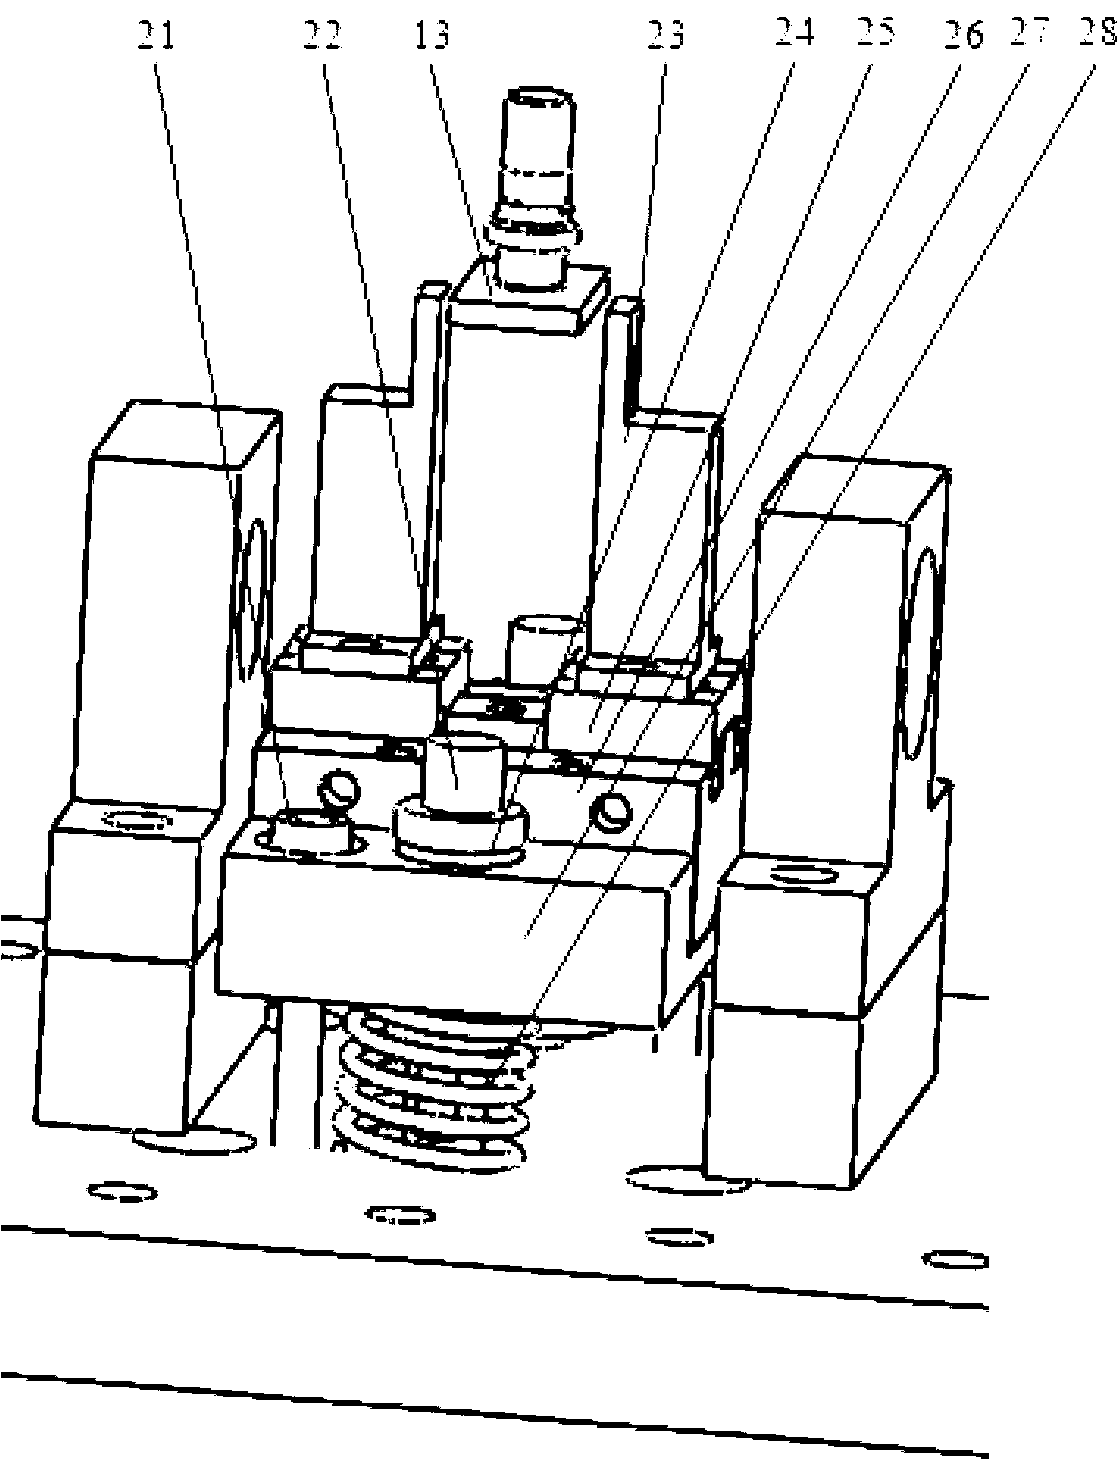 Micro part clamping device